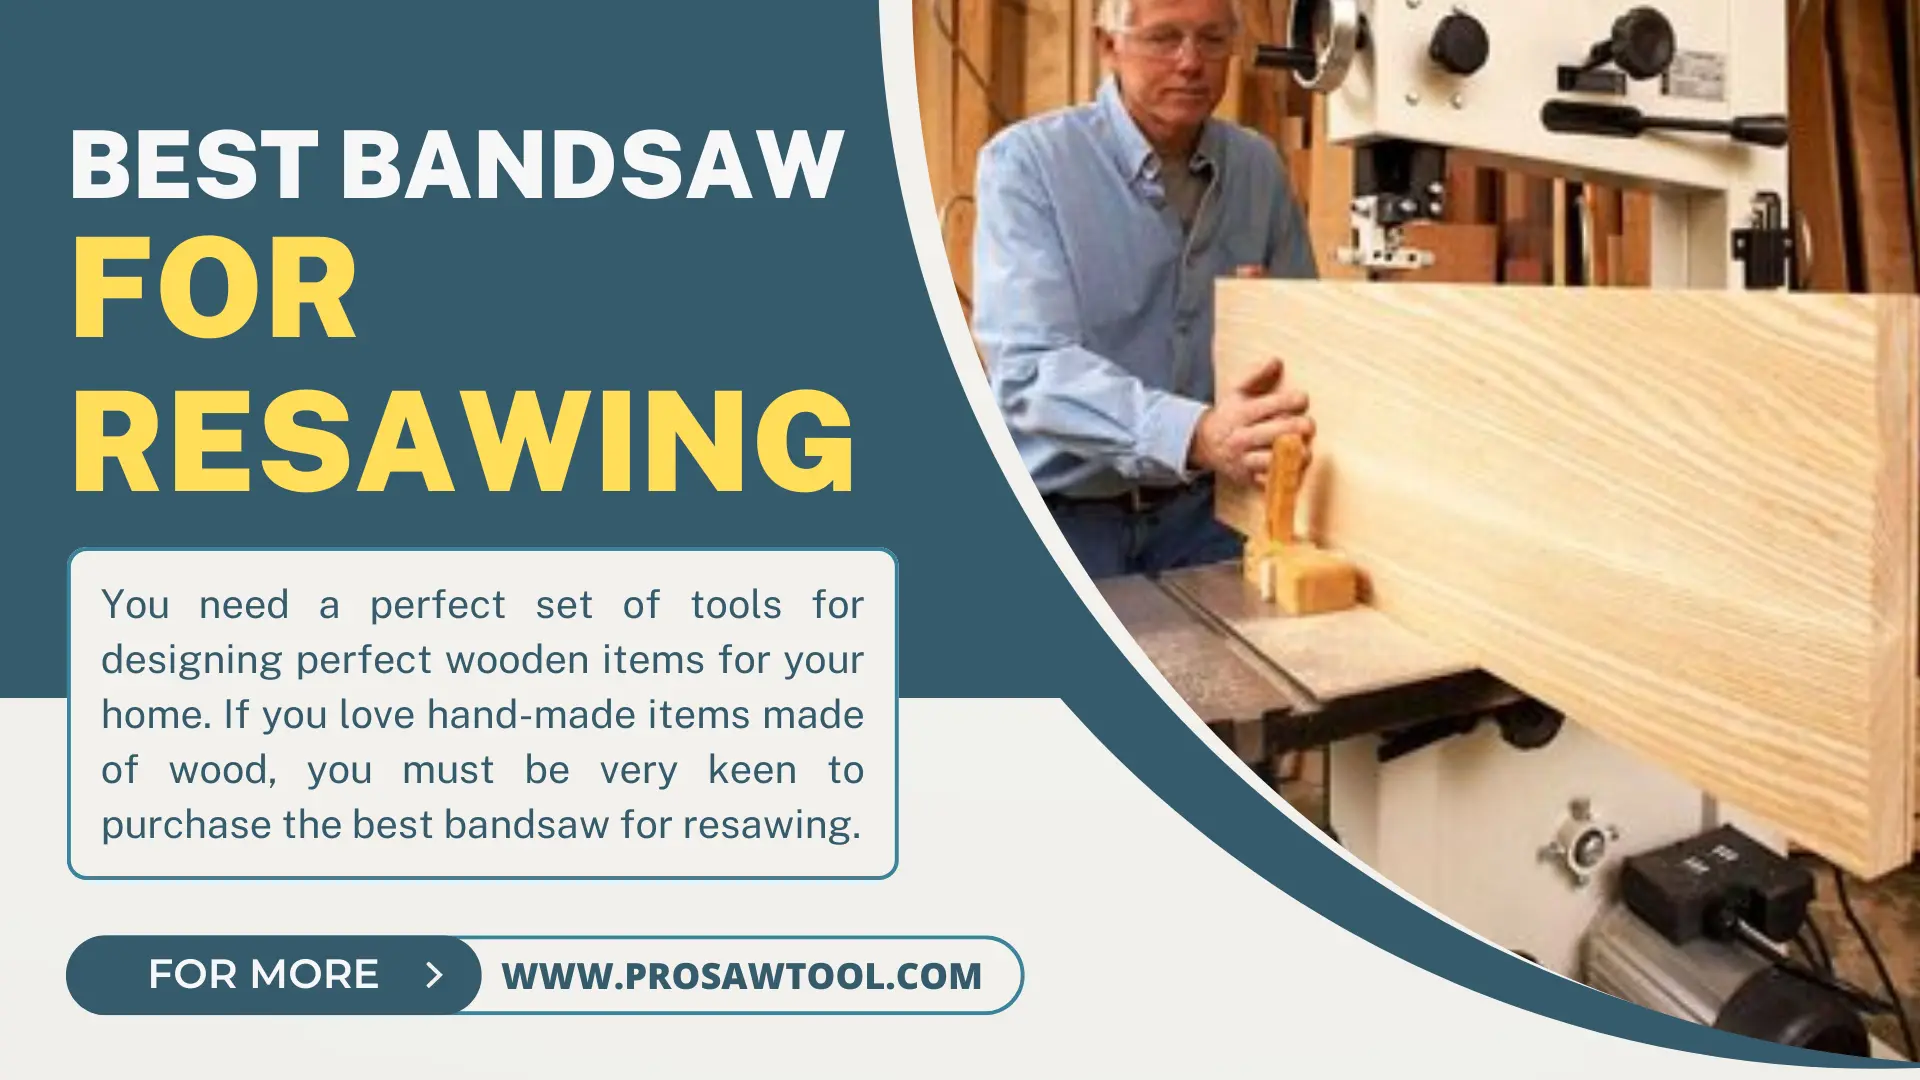 Best Bandsaw for Resawing